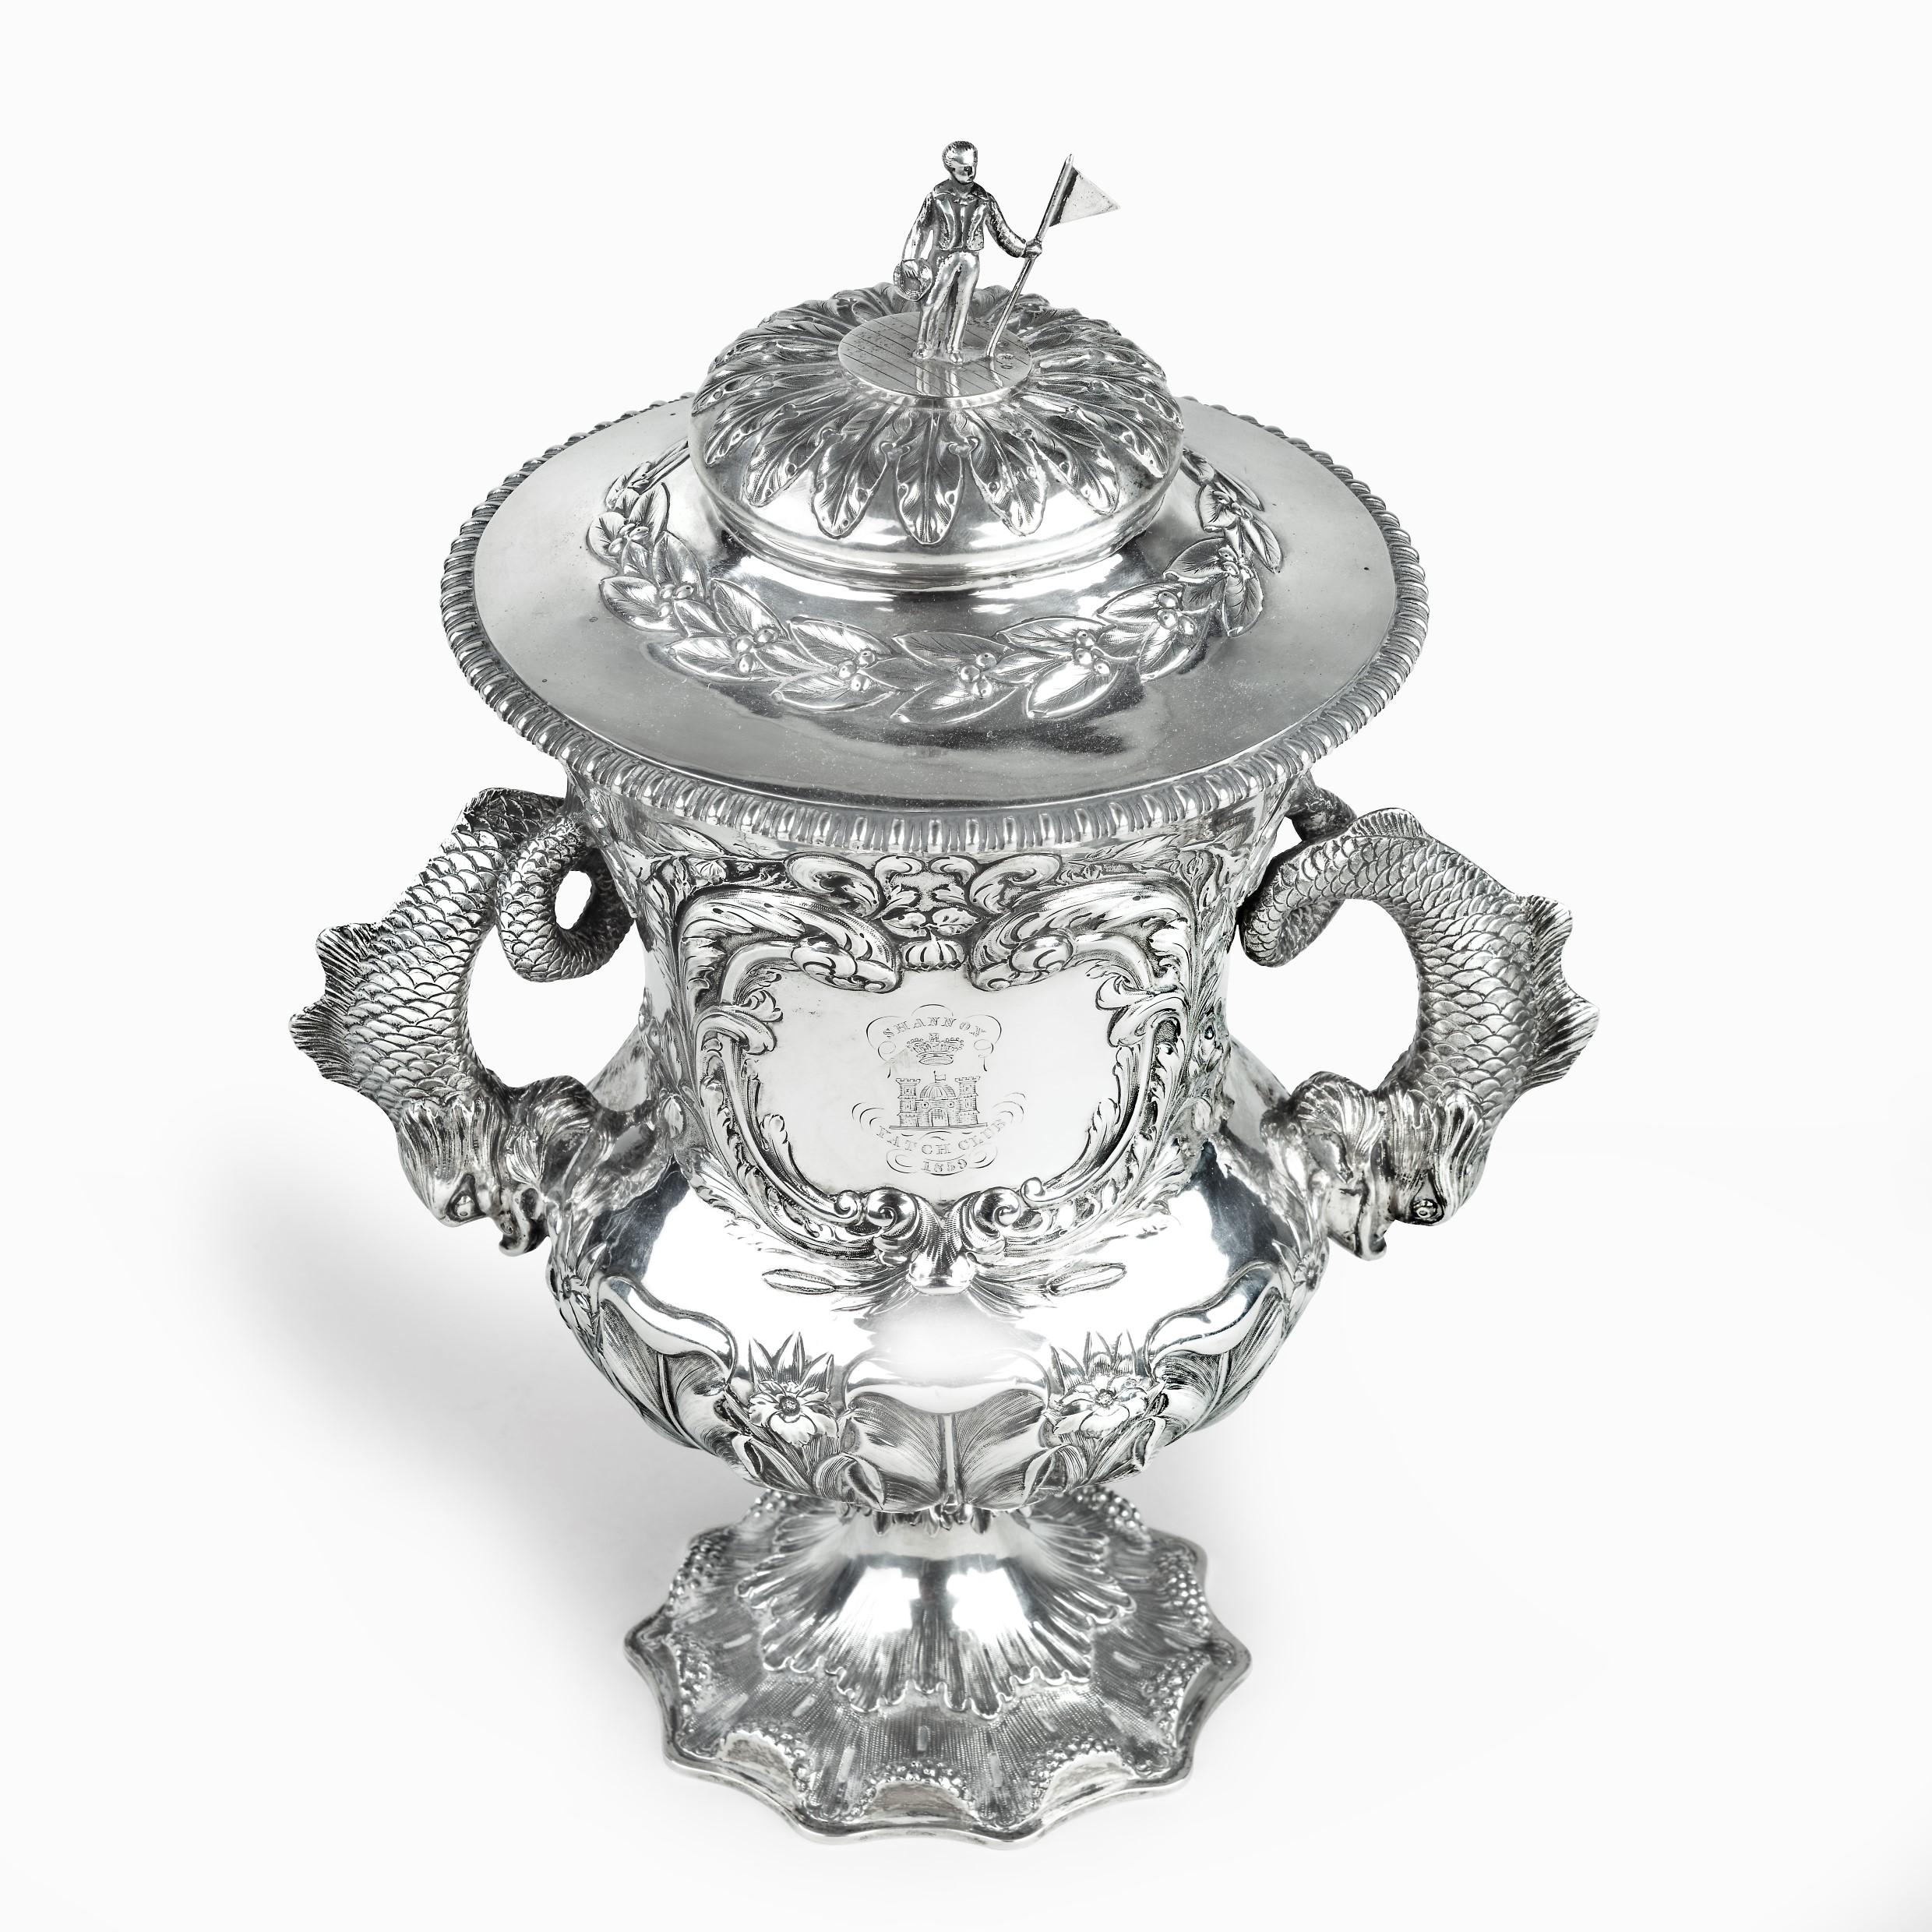 Shannon Yacht Club Silver Racing Trophy for 1859 4